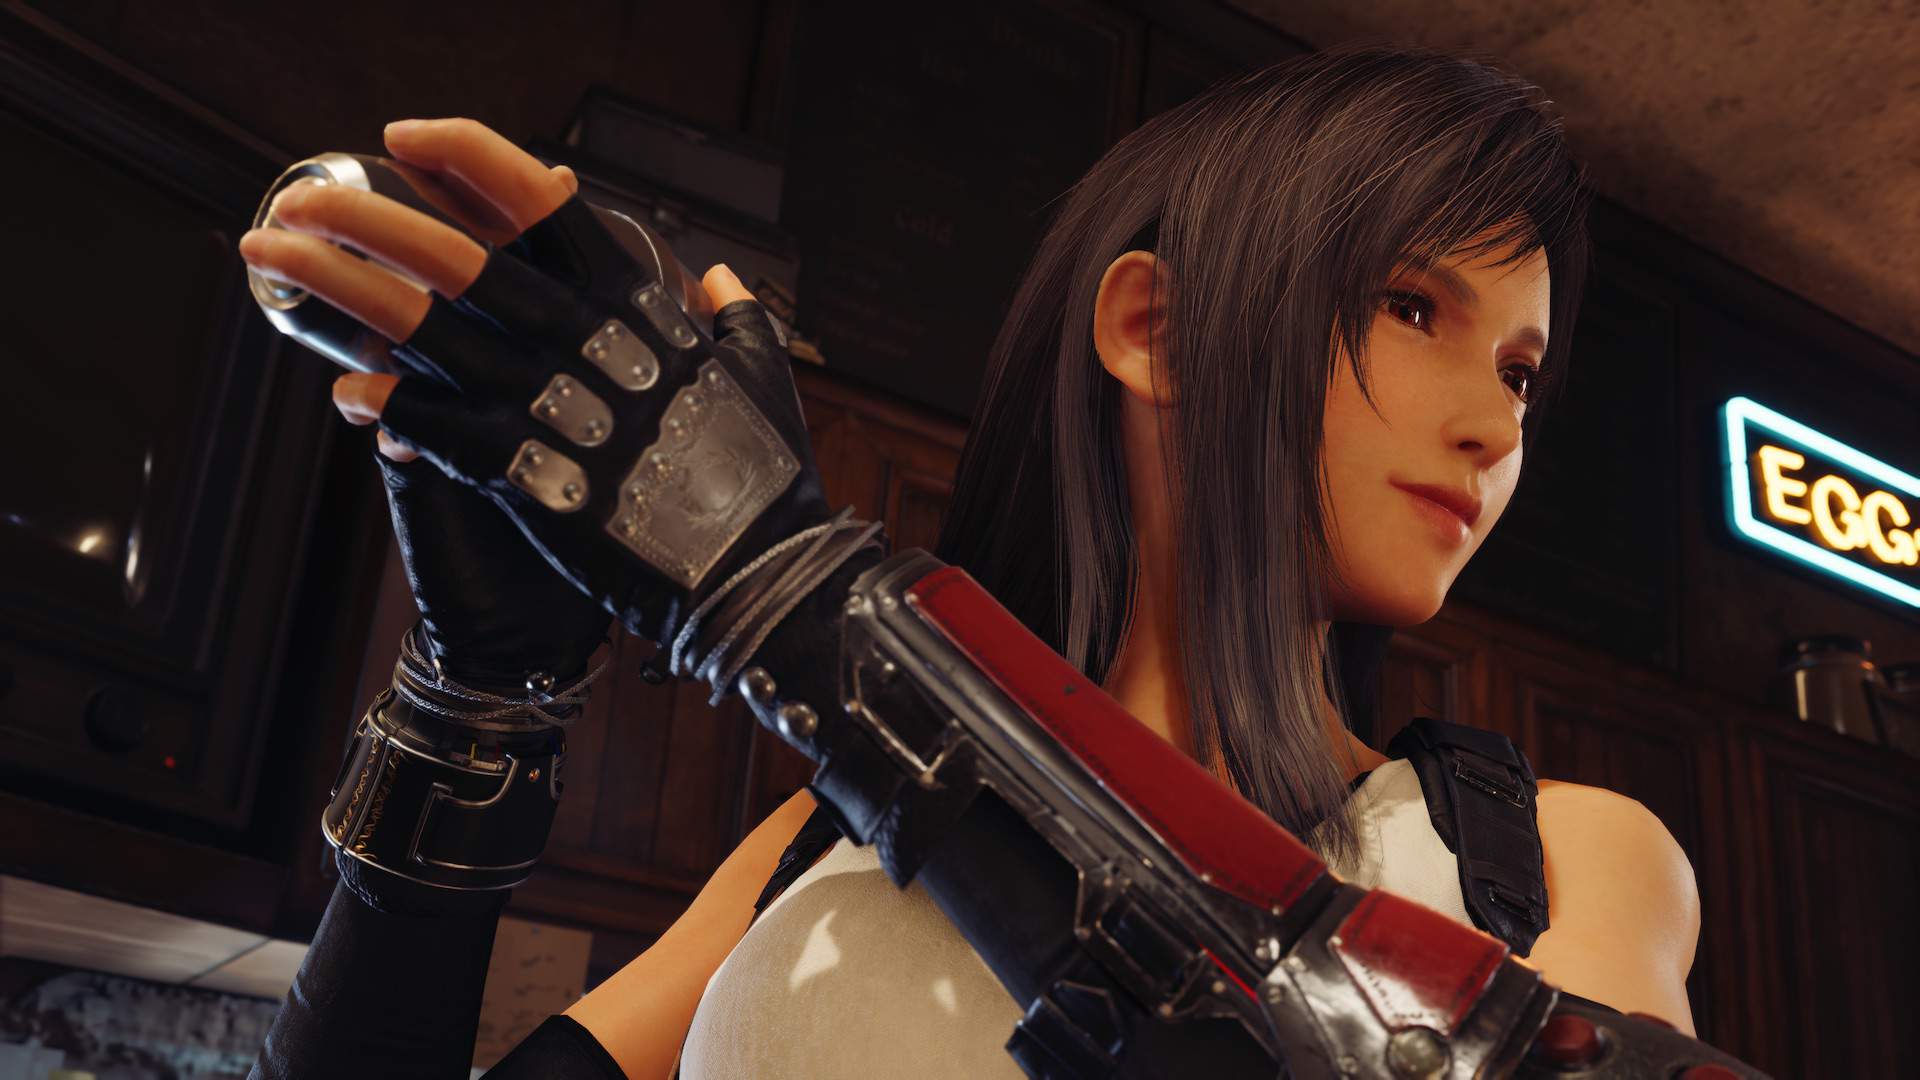 Final Fantasy 7 Remake Part 2 Should Introduce New Characters